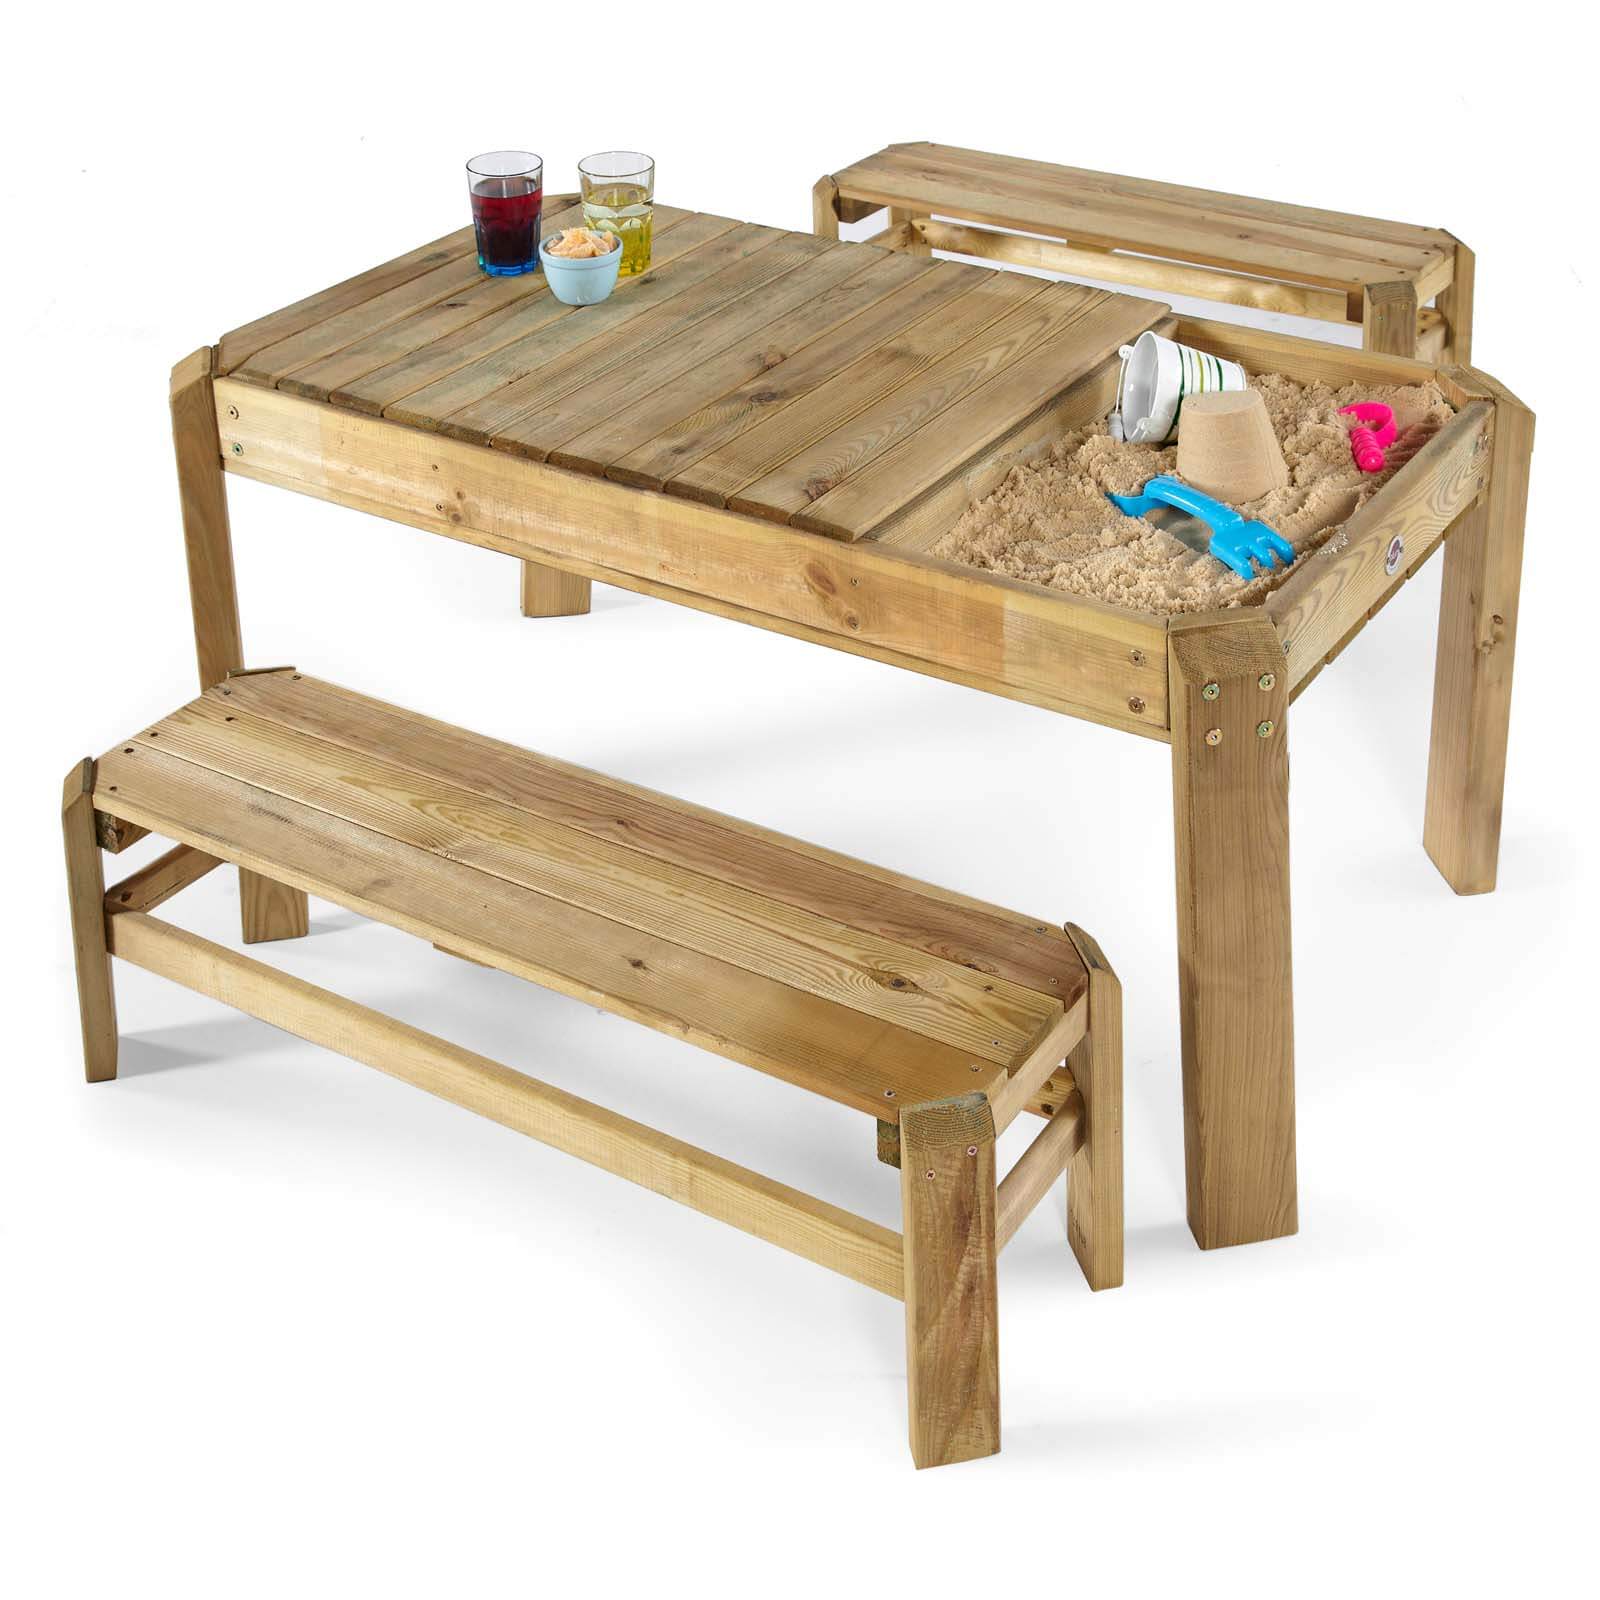 Plum Wooden Activity Table & Benches